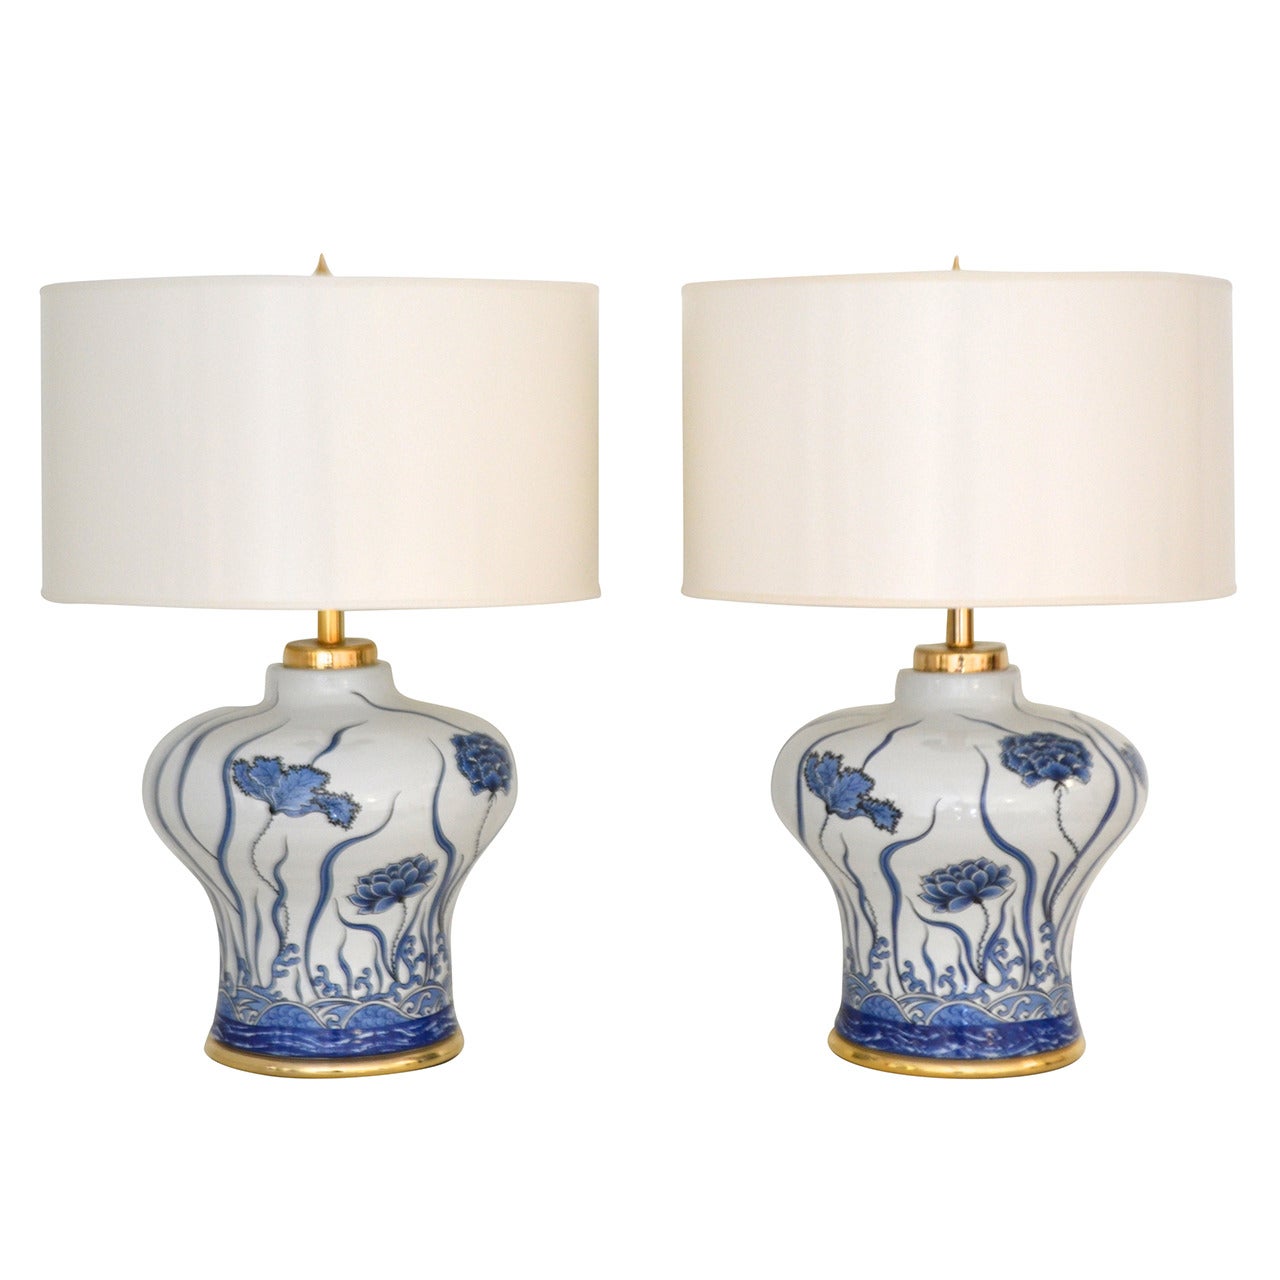 Pair of Porcelain Blue and White Table Lamps